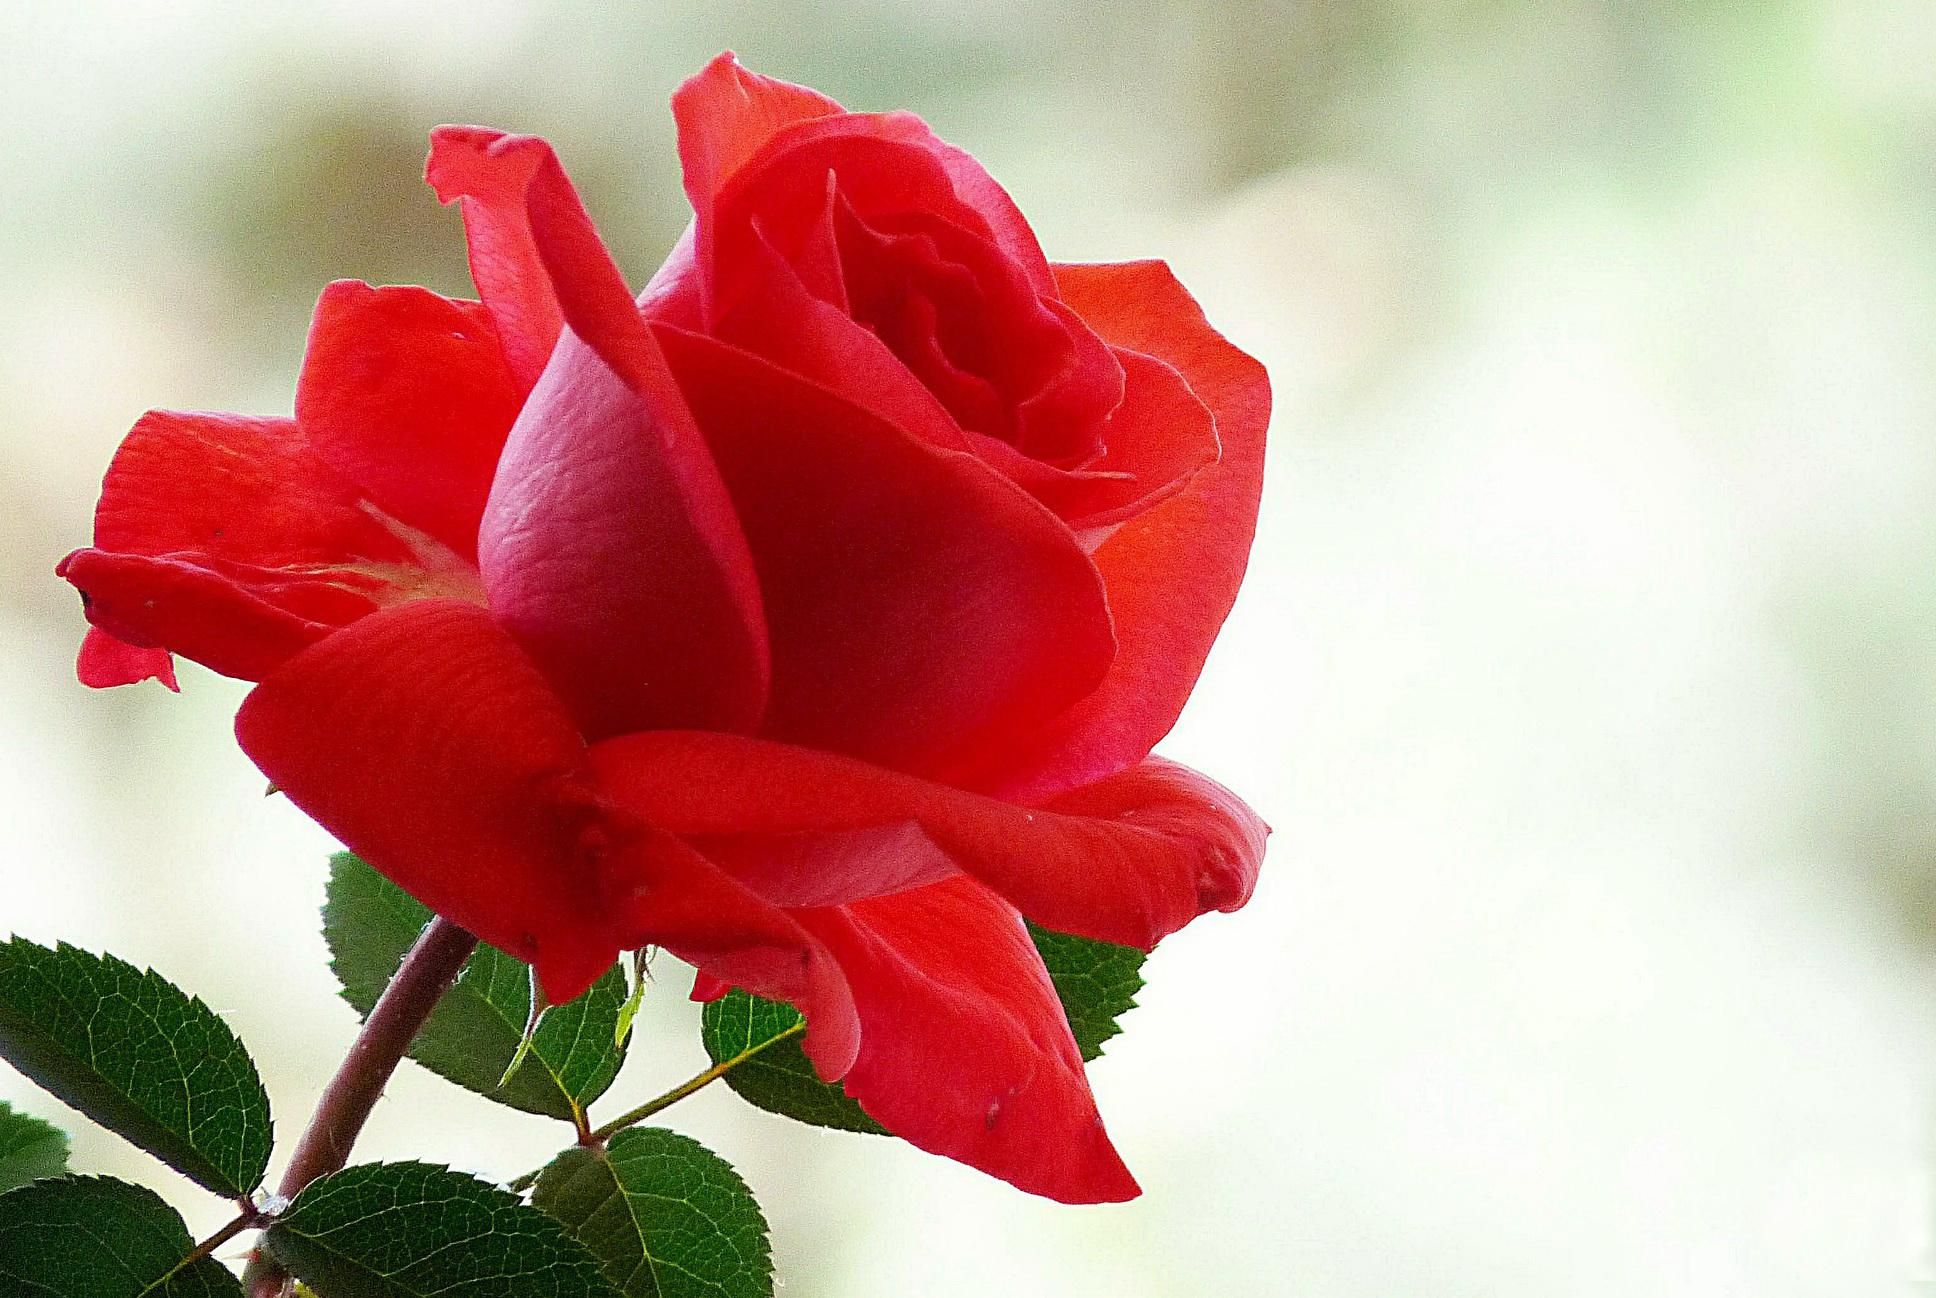 Pretty red rose - - High Quality and Resolution